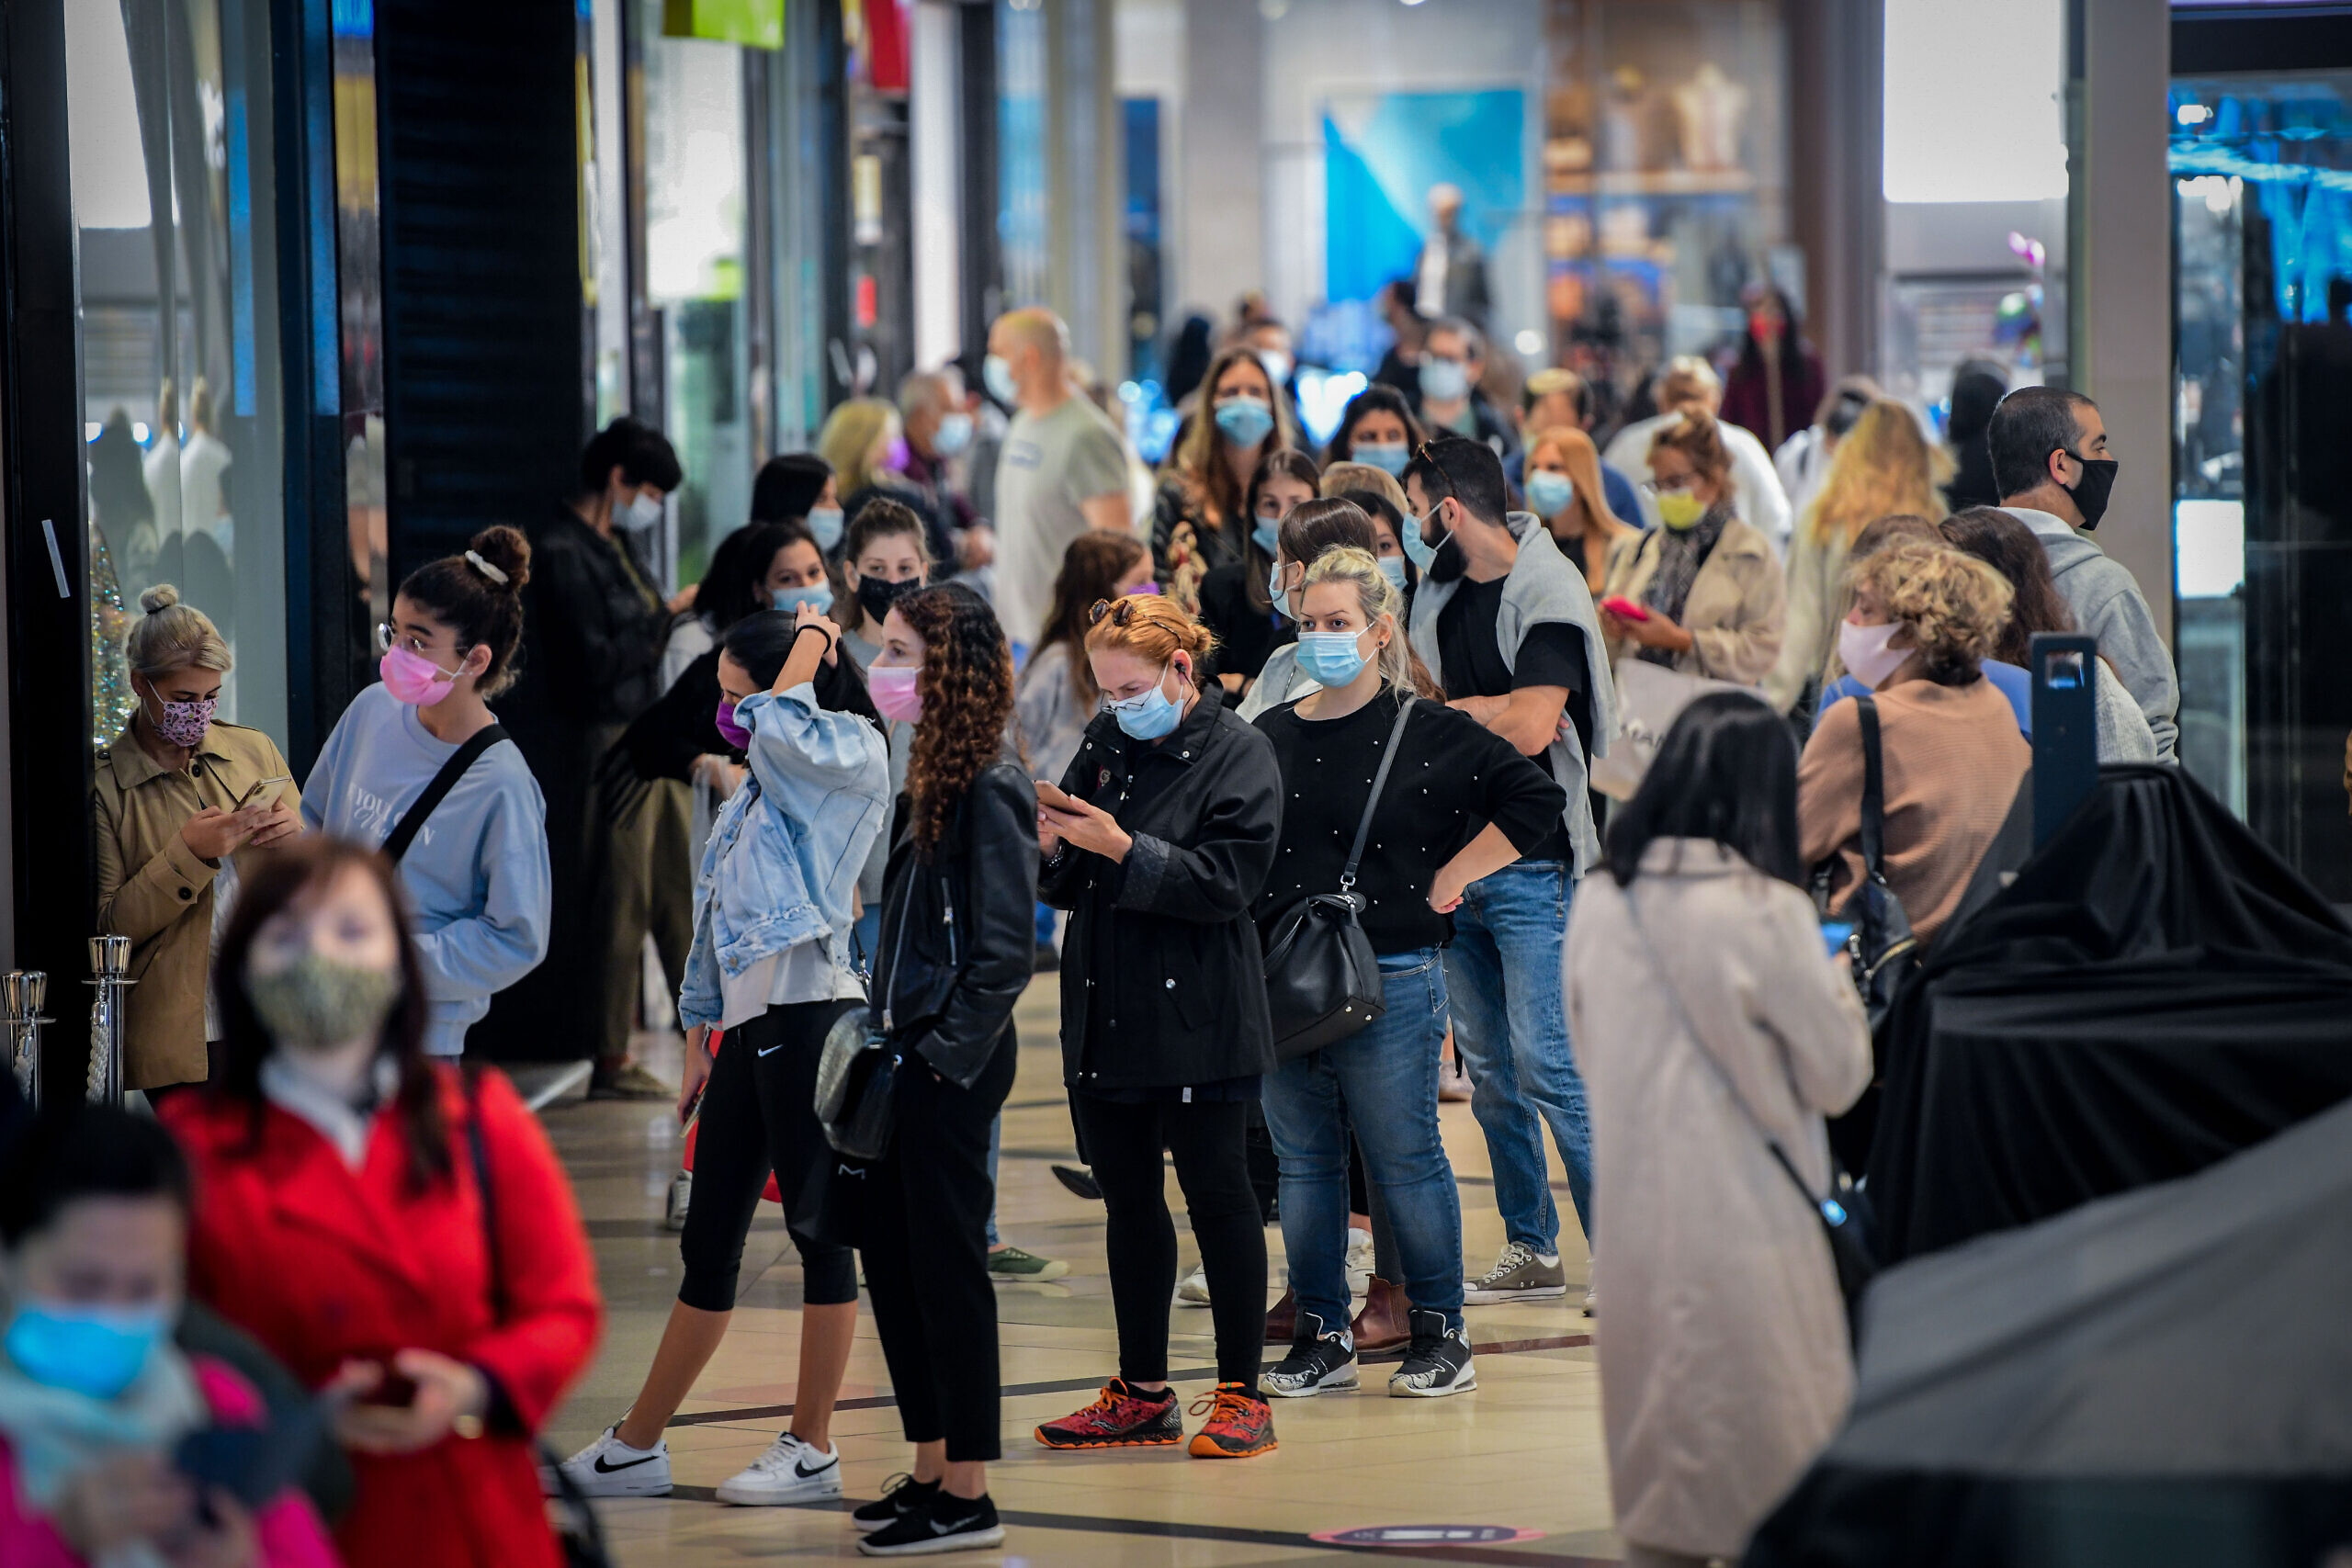 Israelis flock to malls for Black Friday deals amid COVID-19 conditions - What Time Are Malls Open On Black Friday